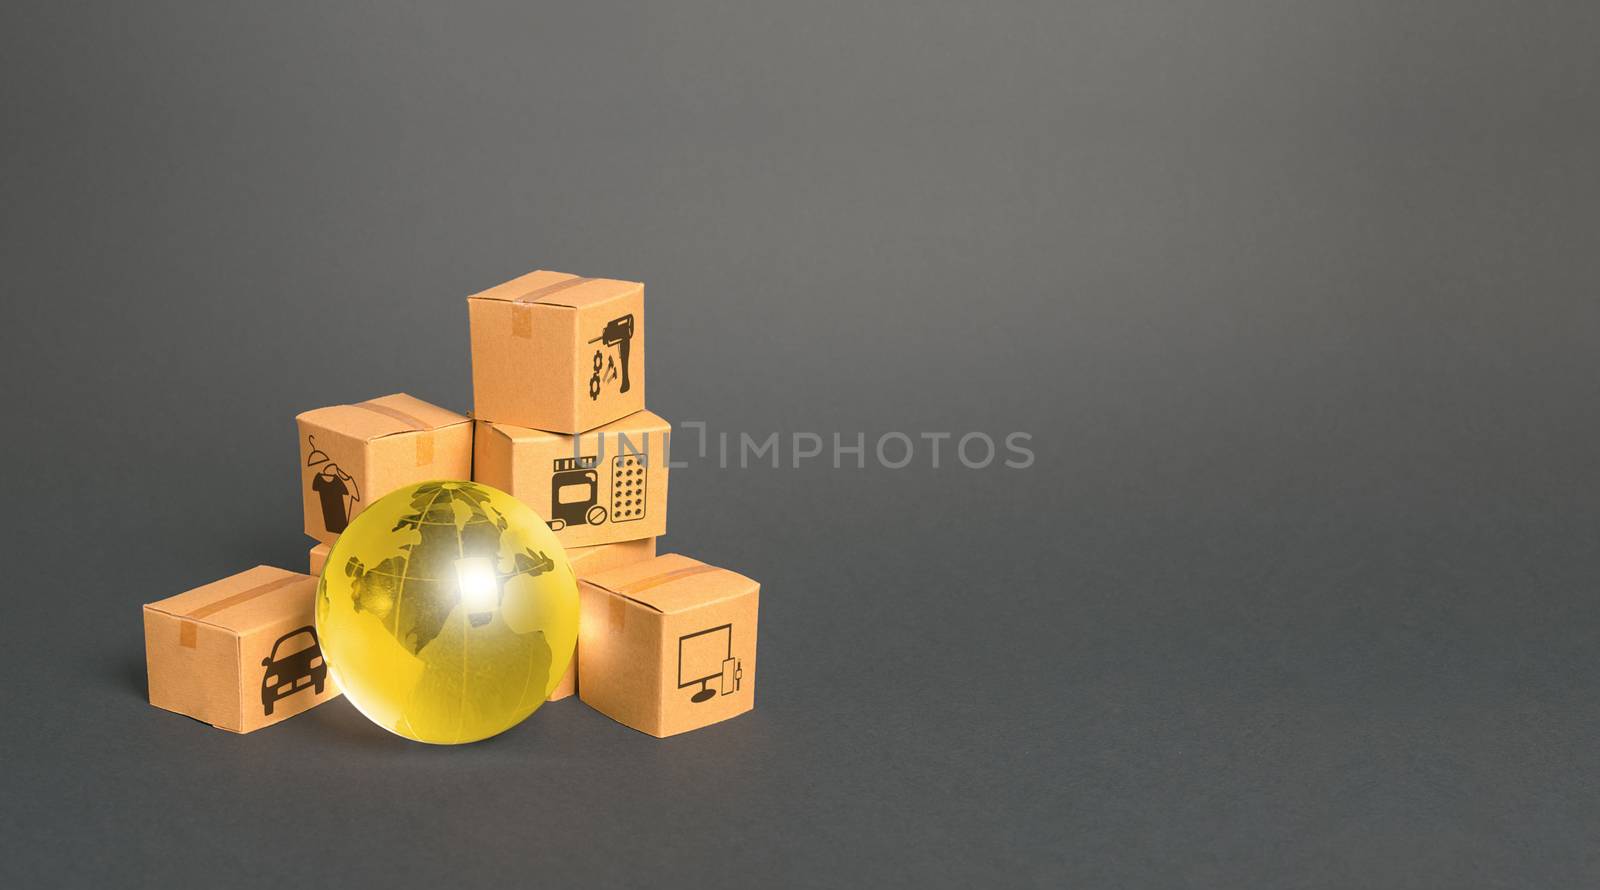 Golden glass globe and cardboard boxes. Globalization markets. Economics development. International world trade distribution. Delivery of goods, shipping. Global economy, import export freight traffic